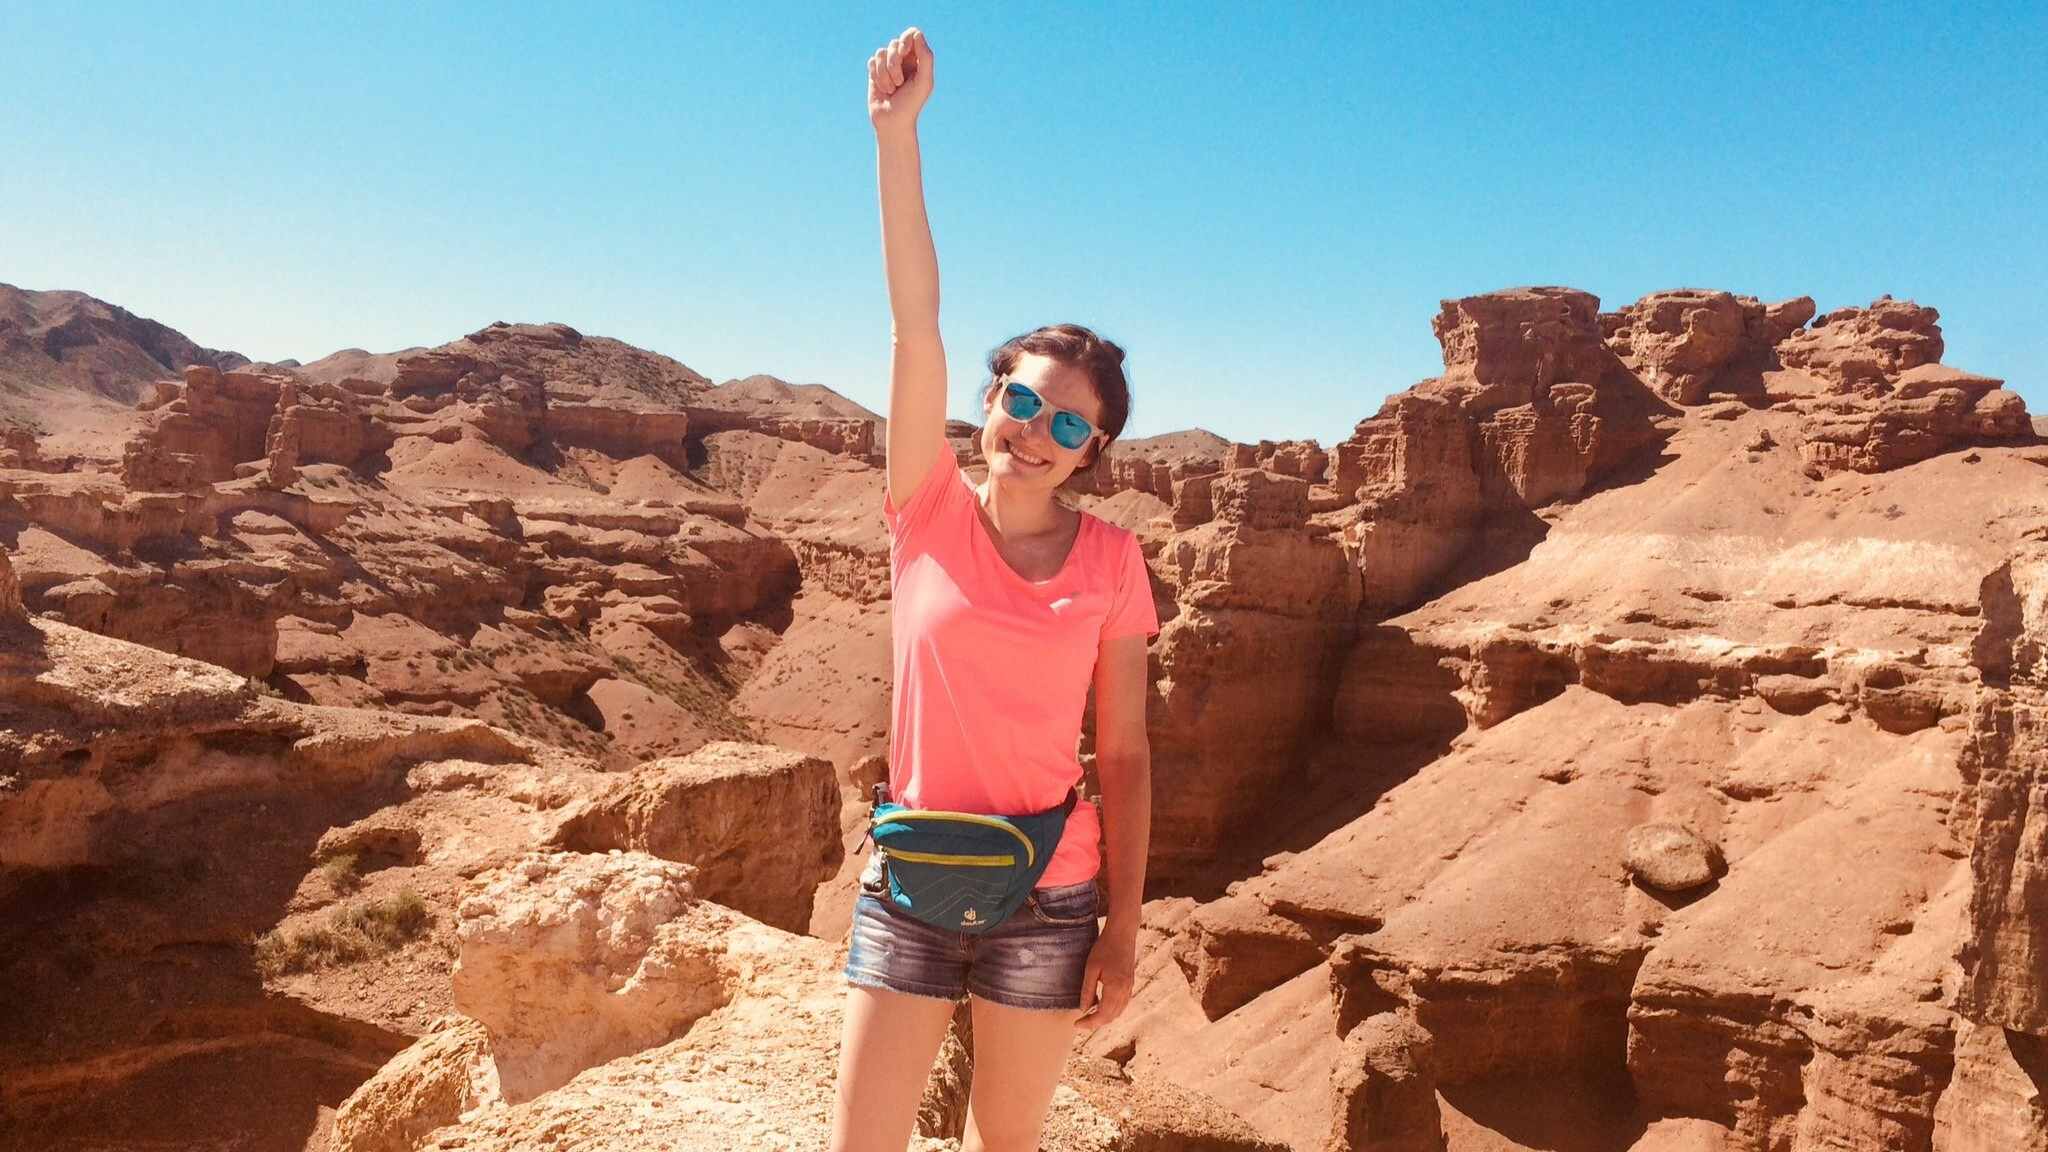 Autoimmune Diseases: A smiling Maria Mazurek in a pink shirt and sunglasses raises her fist triumphantly while standing in front of a scenic desert canyon under a clear blue sky.